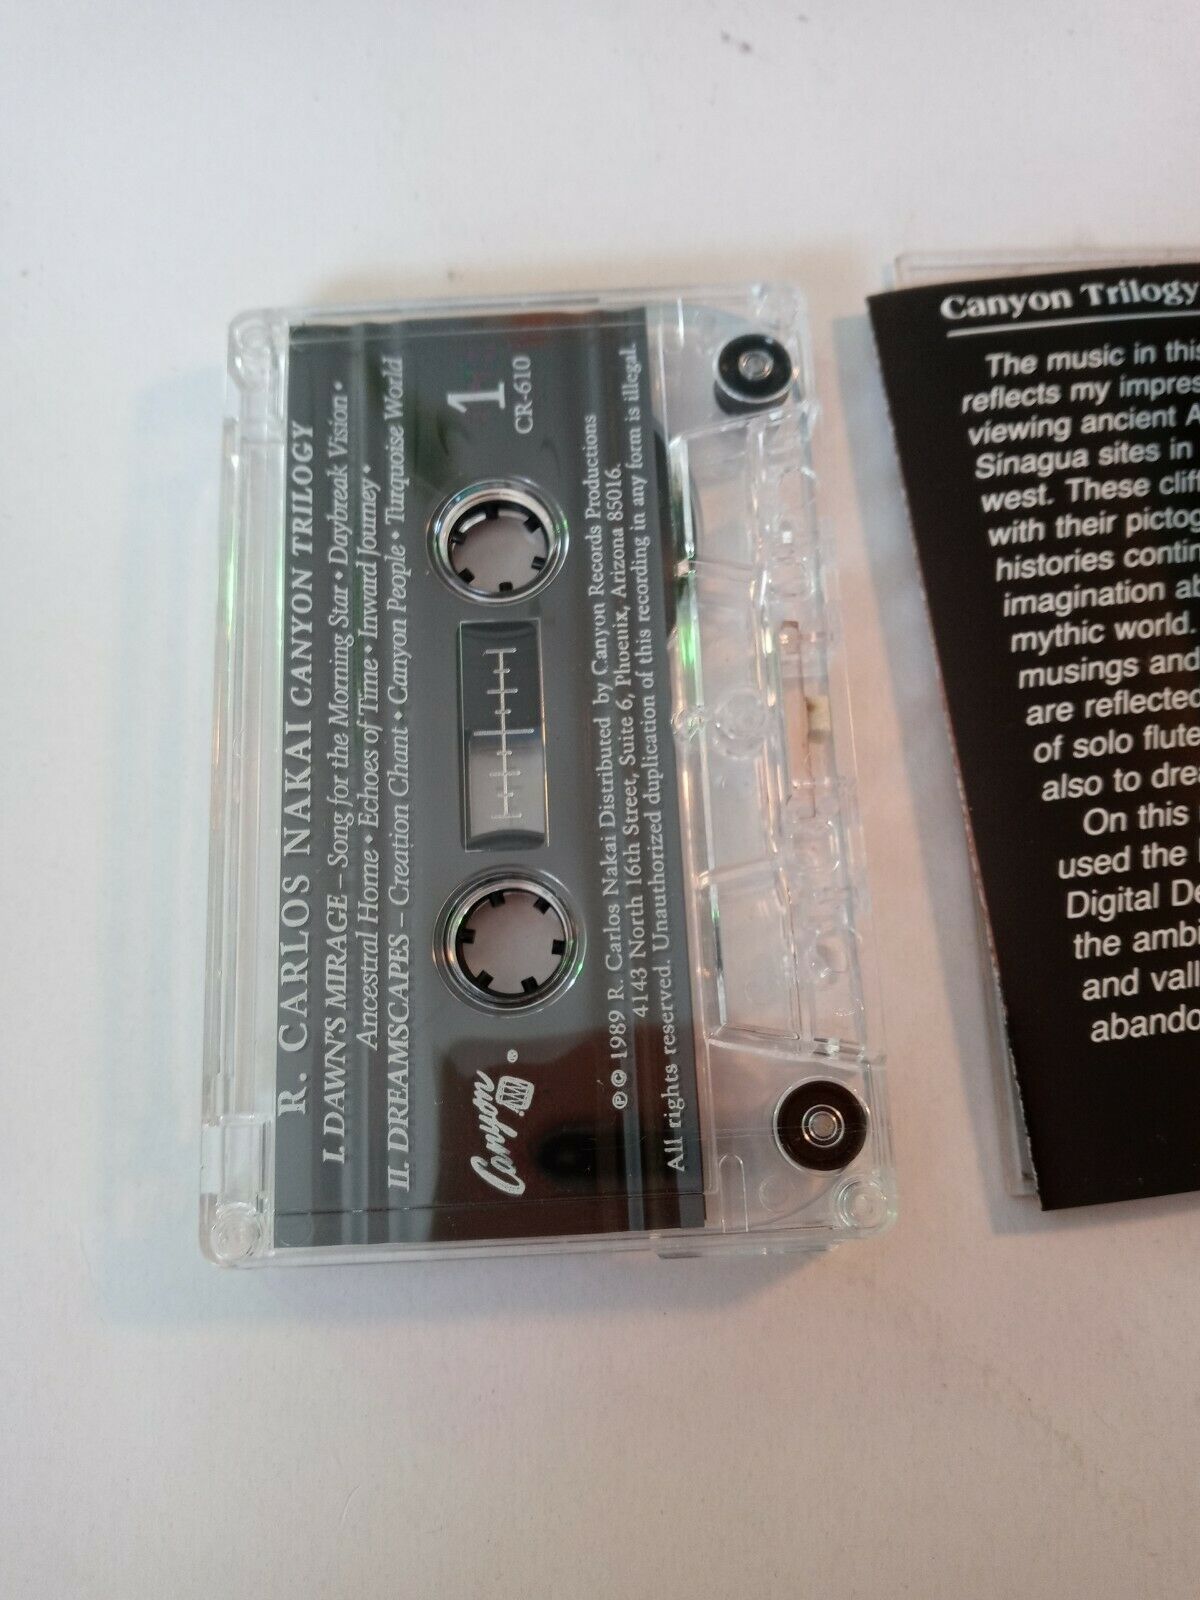 Canyon Trilogy R. Carlos Nakai Cassette and similar items